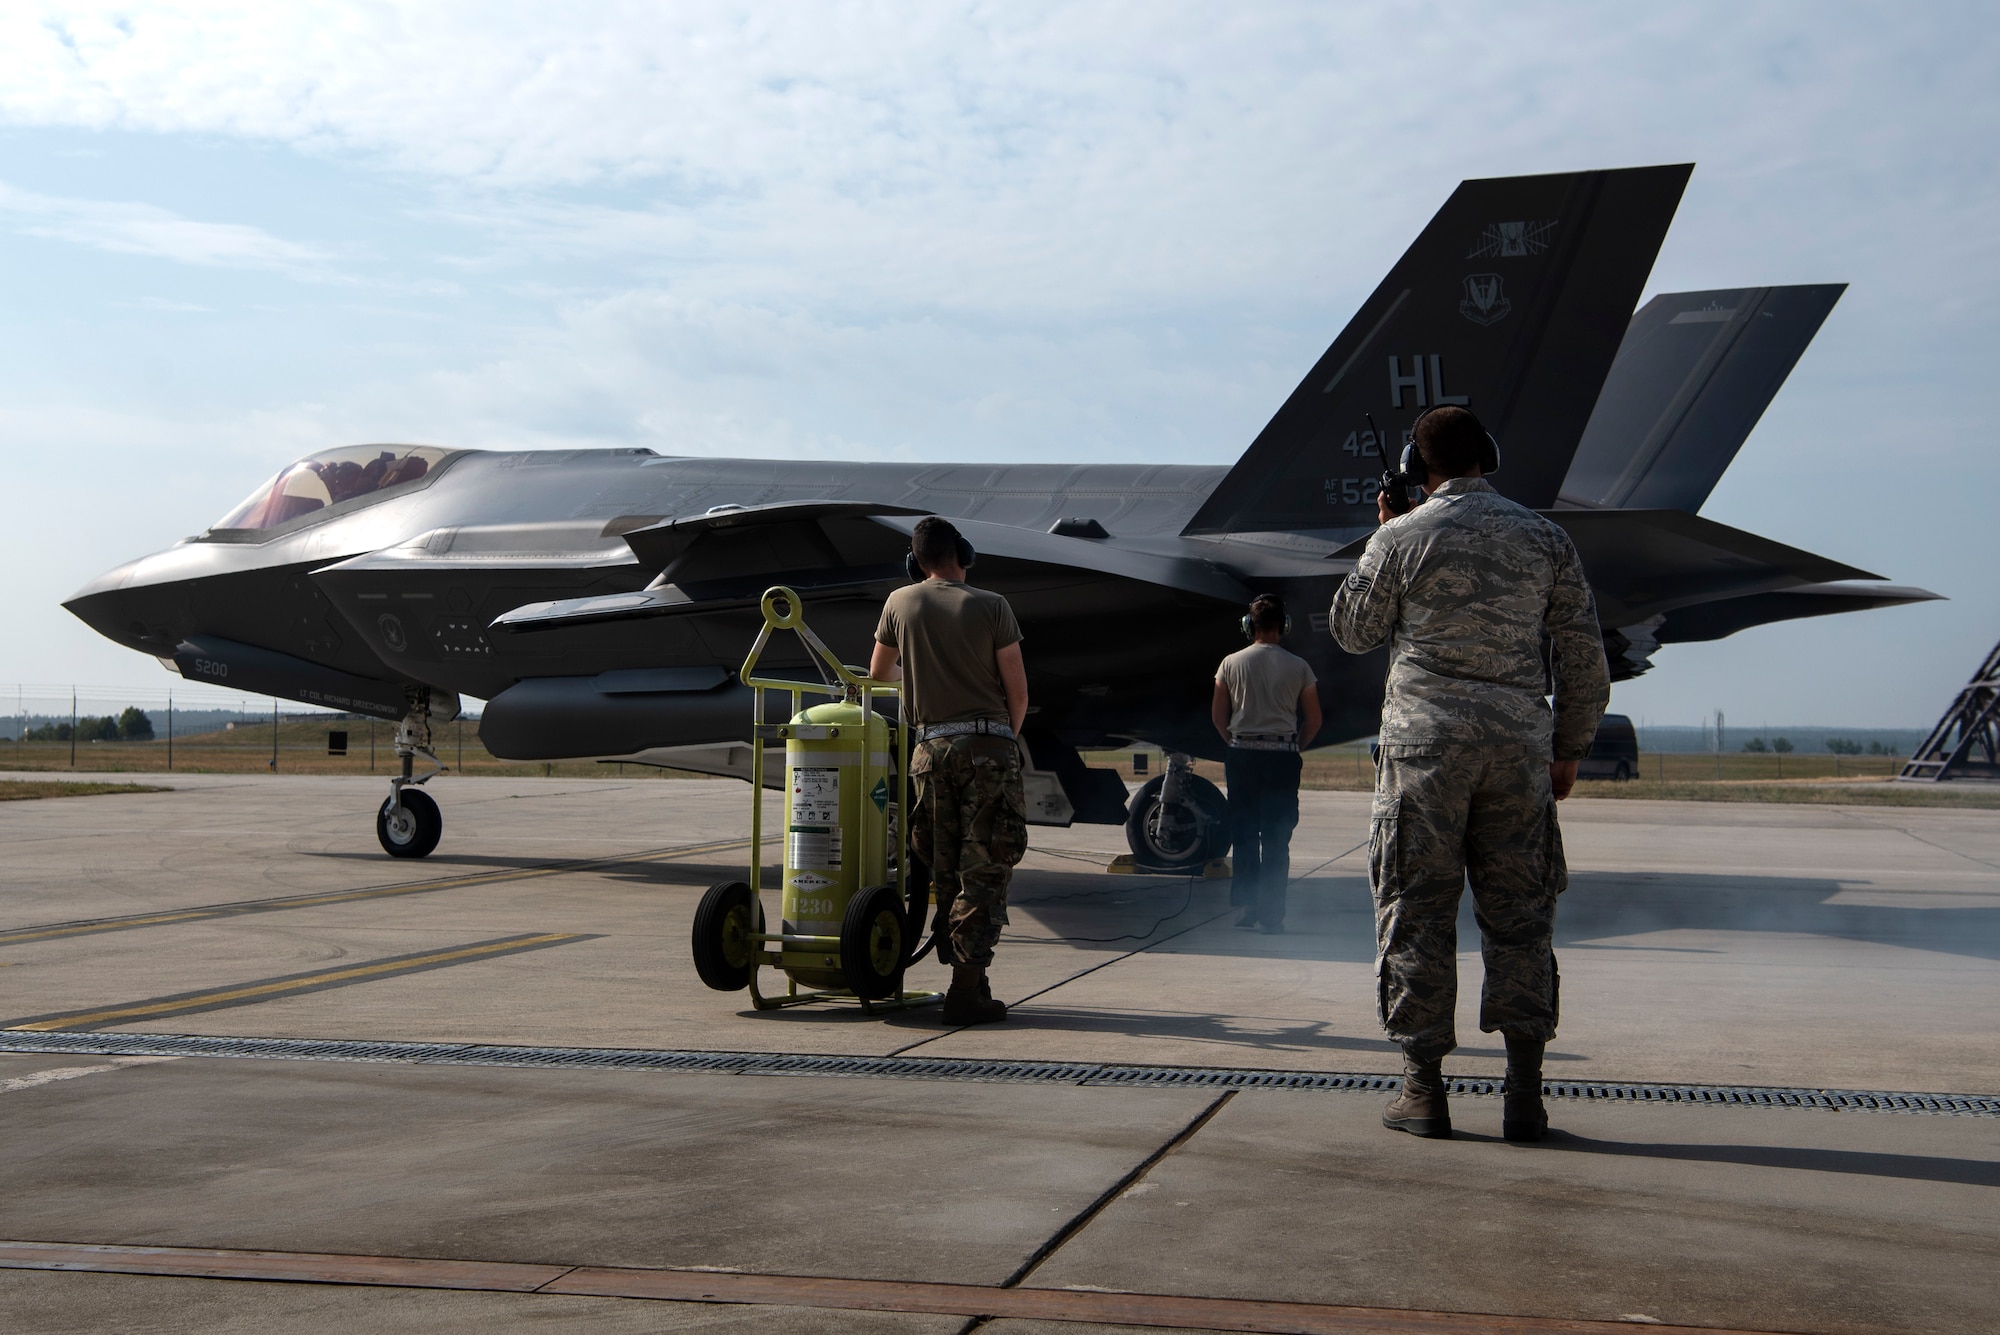 U.S. Air Force Senior Airman Tyler McGaughey, 421st Fighter Squadron avionics specialist, Airman 1st Class Cody Albert, 421st FS crew chief, and Staff Sgt. David Sasak, 421st FS crew chief, prepare an F-35A Lightning II for launch during Operation Rapid Forge at Spangdahlem Air Base, Germany, July 18, 2019. Rapid Forge aircraft are forward deploying to bases in the territory of NATO allies. Training with multinational air forces during operations strengthens allied coalition forces. (U.S. Air Force photo by Airman 1st Class Valerie Seelye)